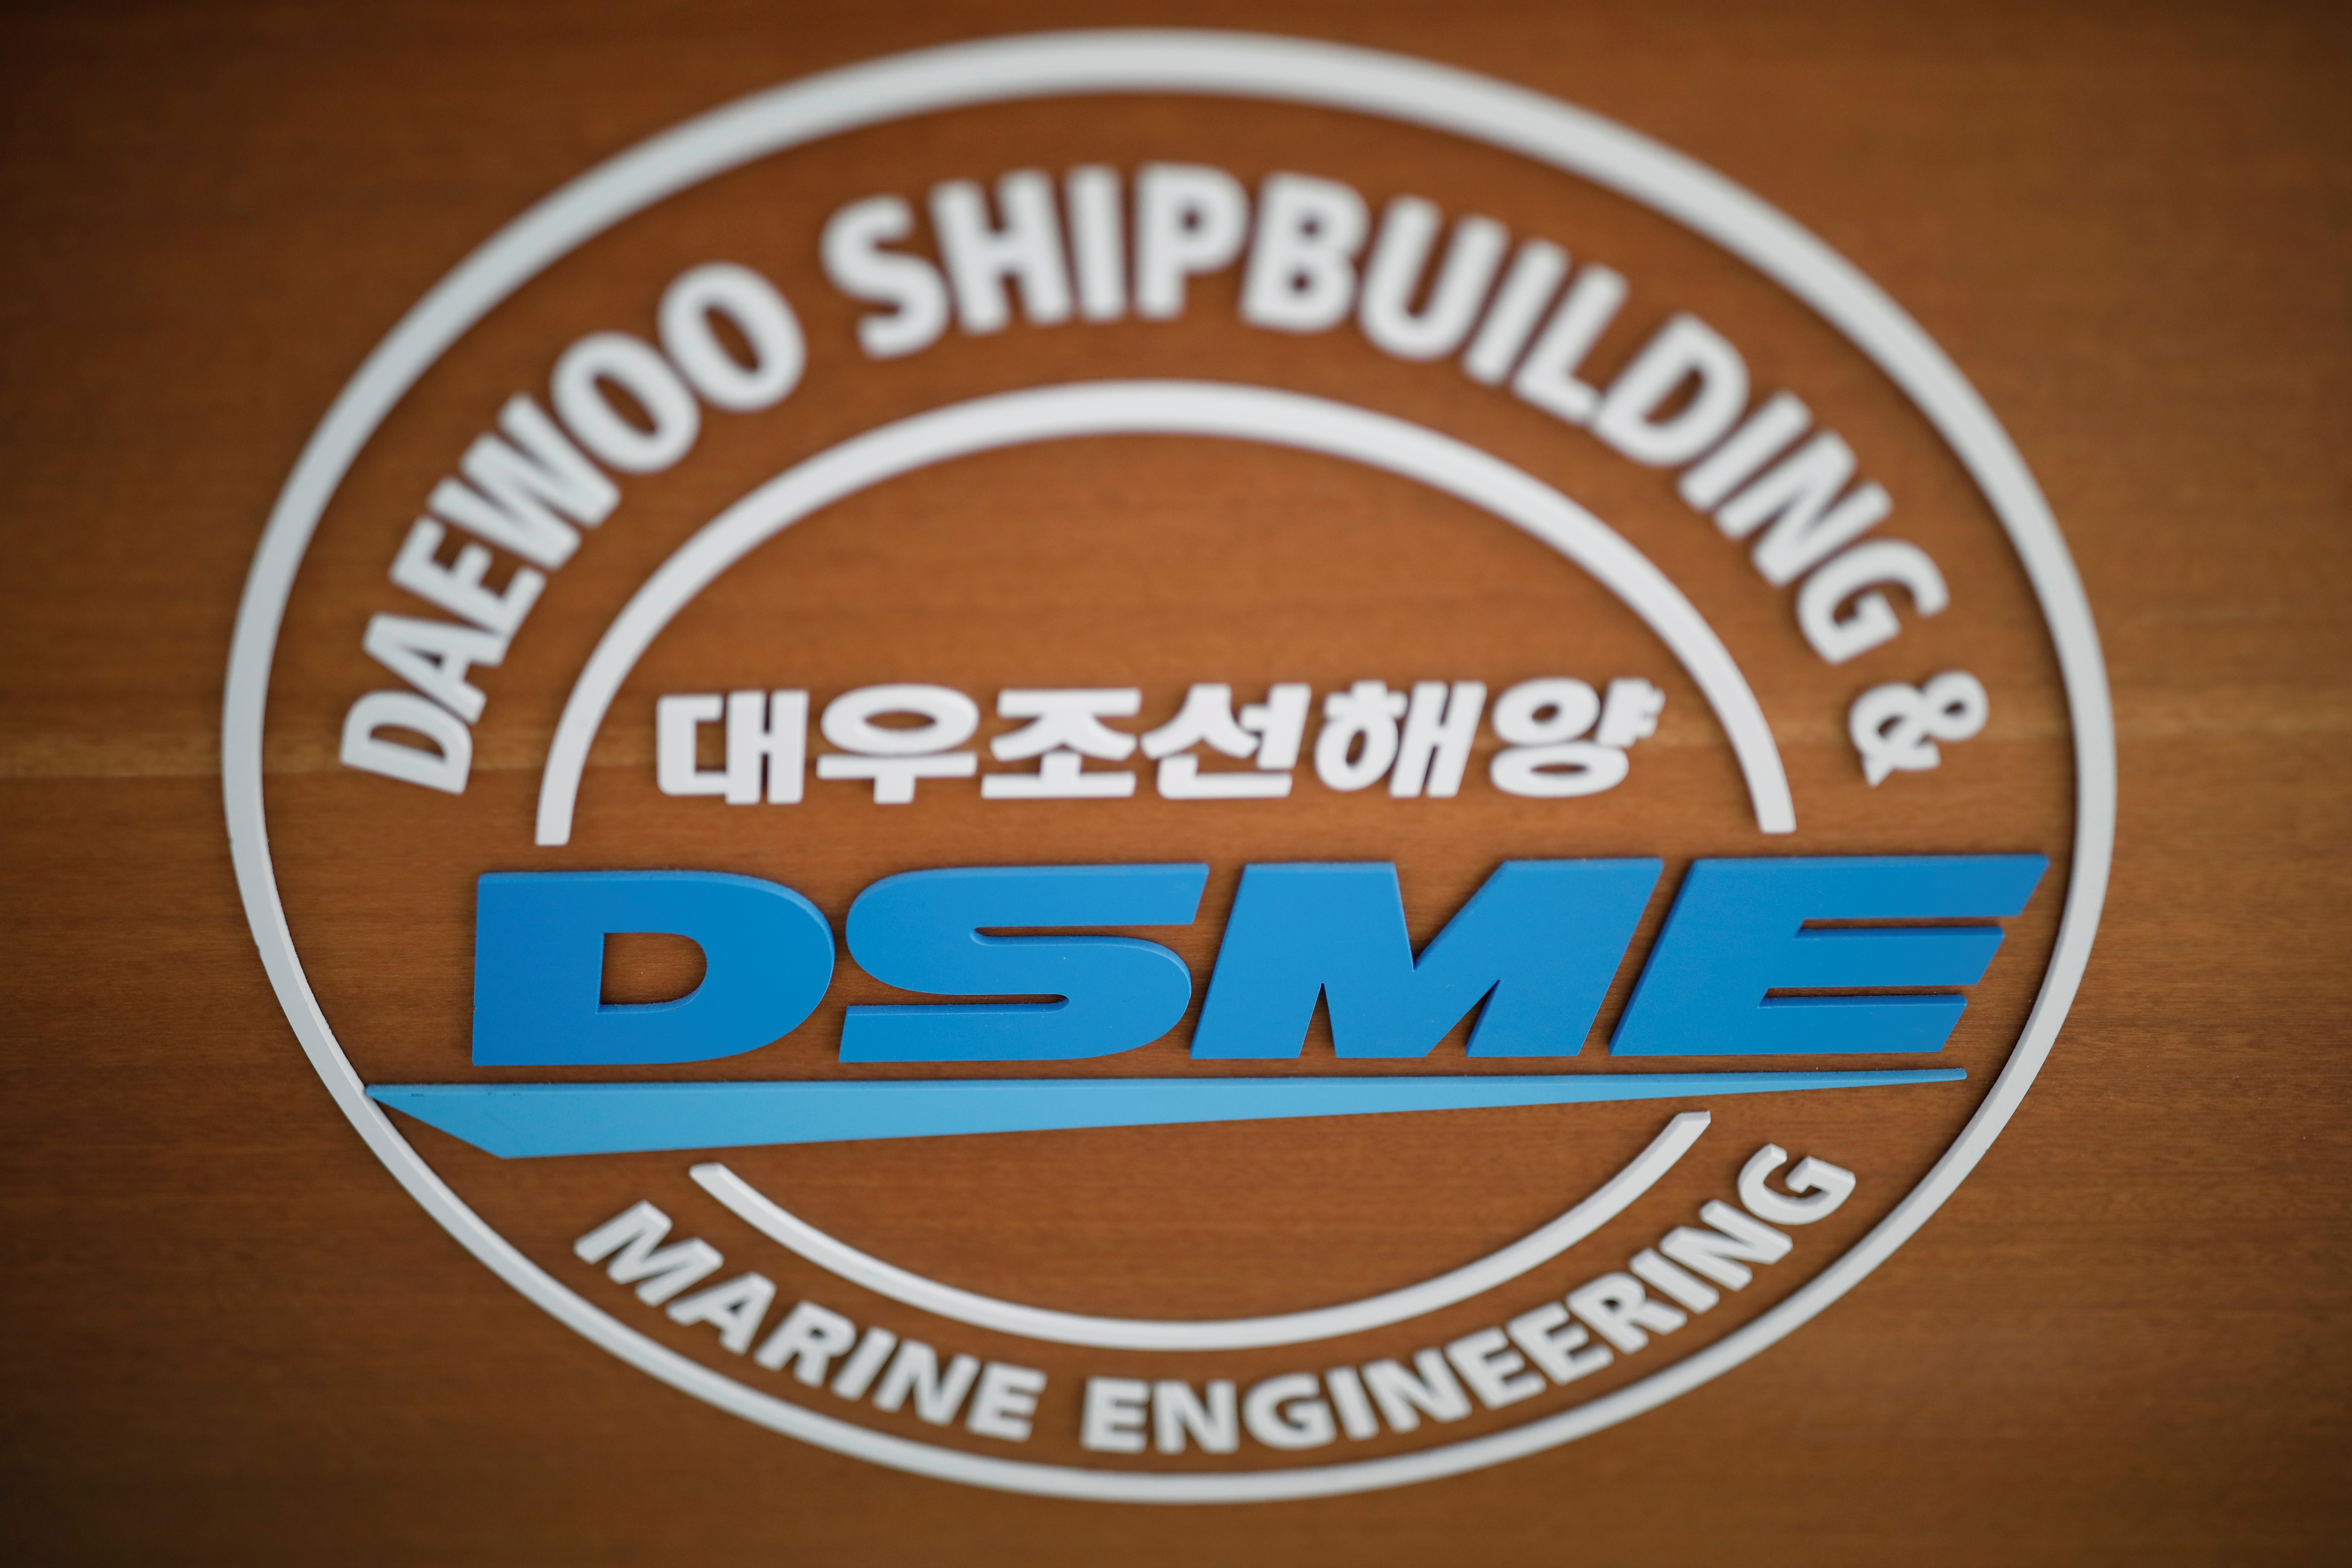 The logo of Daewoo Shipbuilding & Marine Engineering Co is seen at its building in Seoul